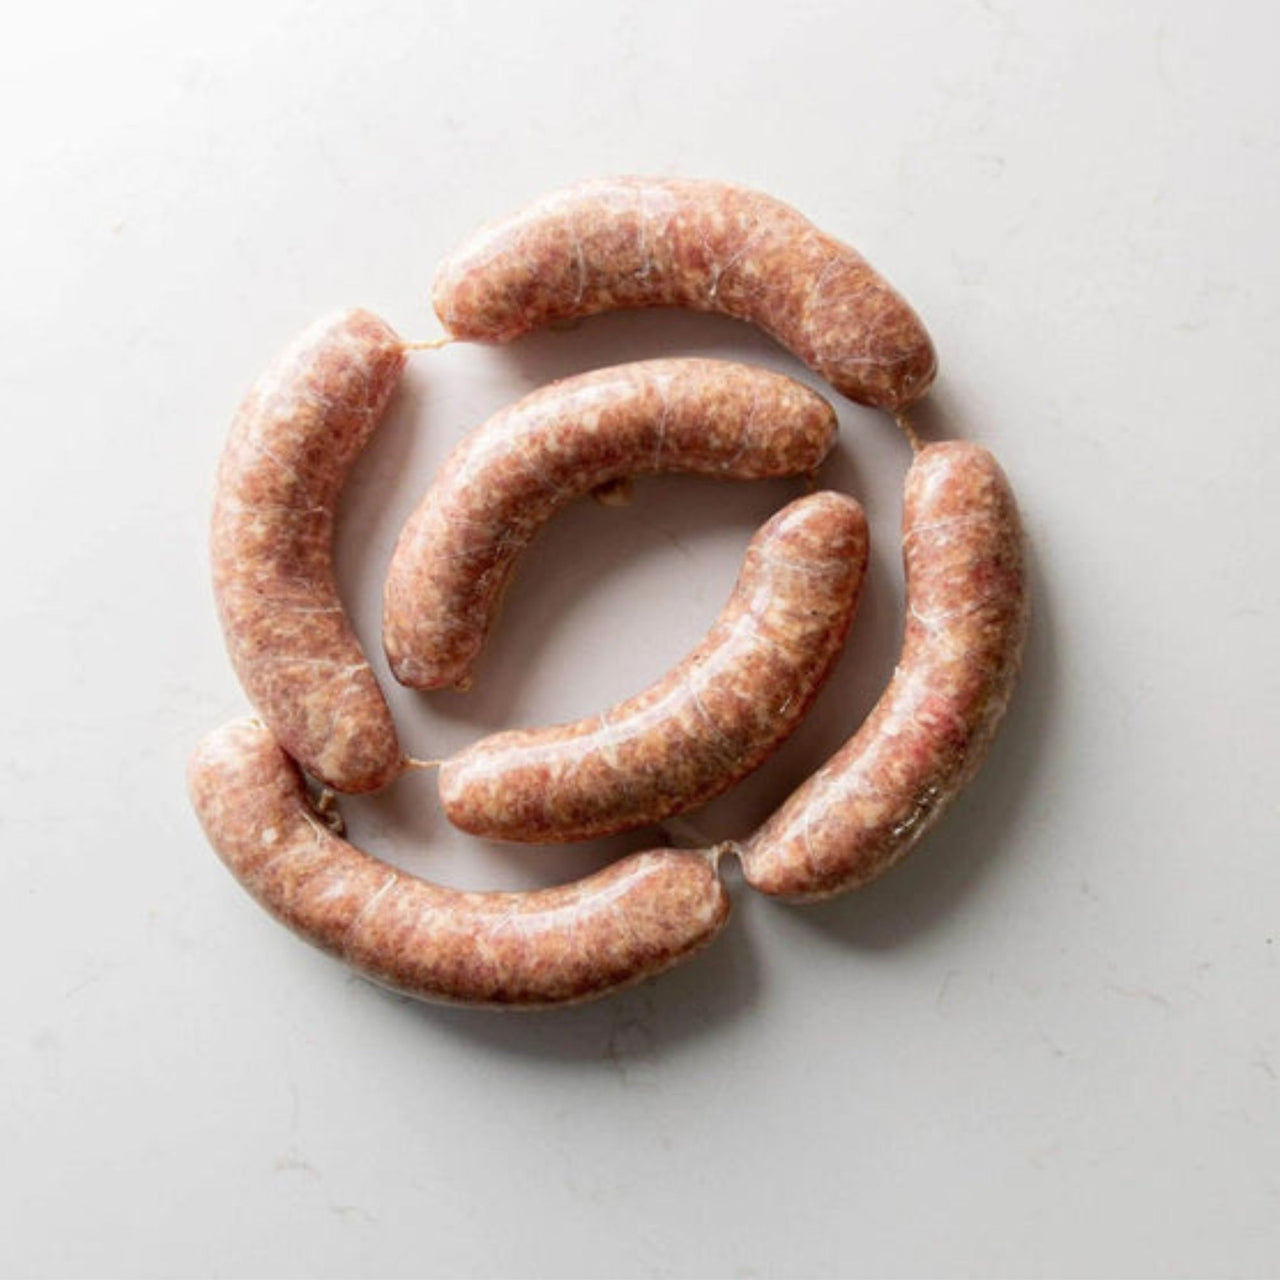 Image of F2F Sweet Italian Sausages 1.8kg pack of 12 - 1 x 1.8 Kilos